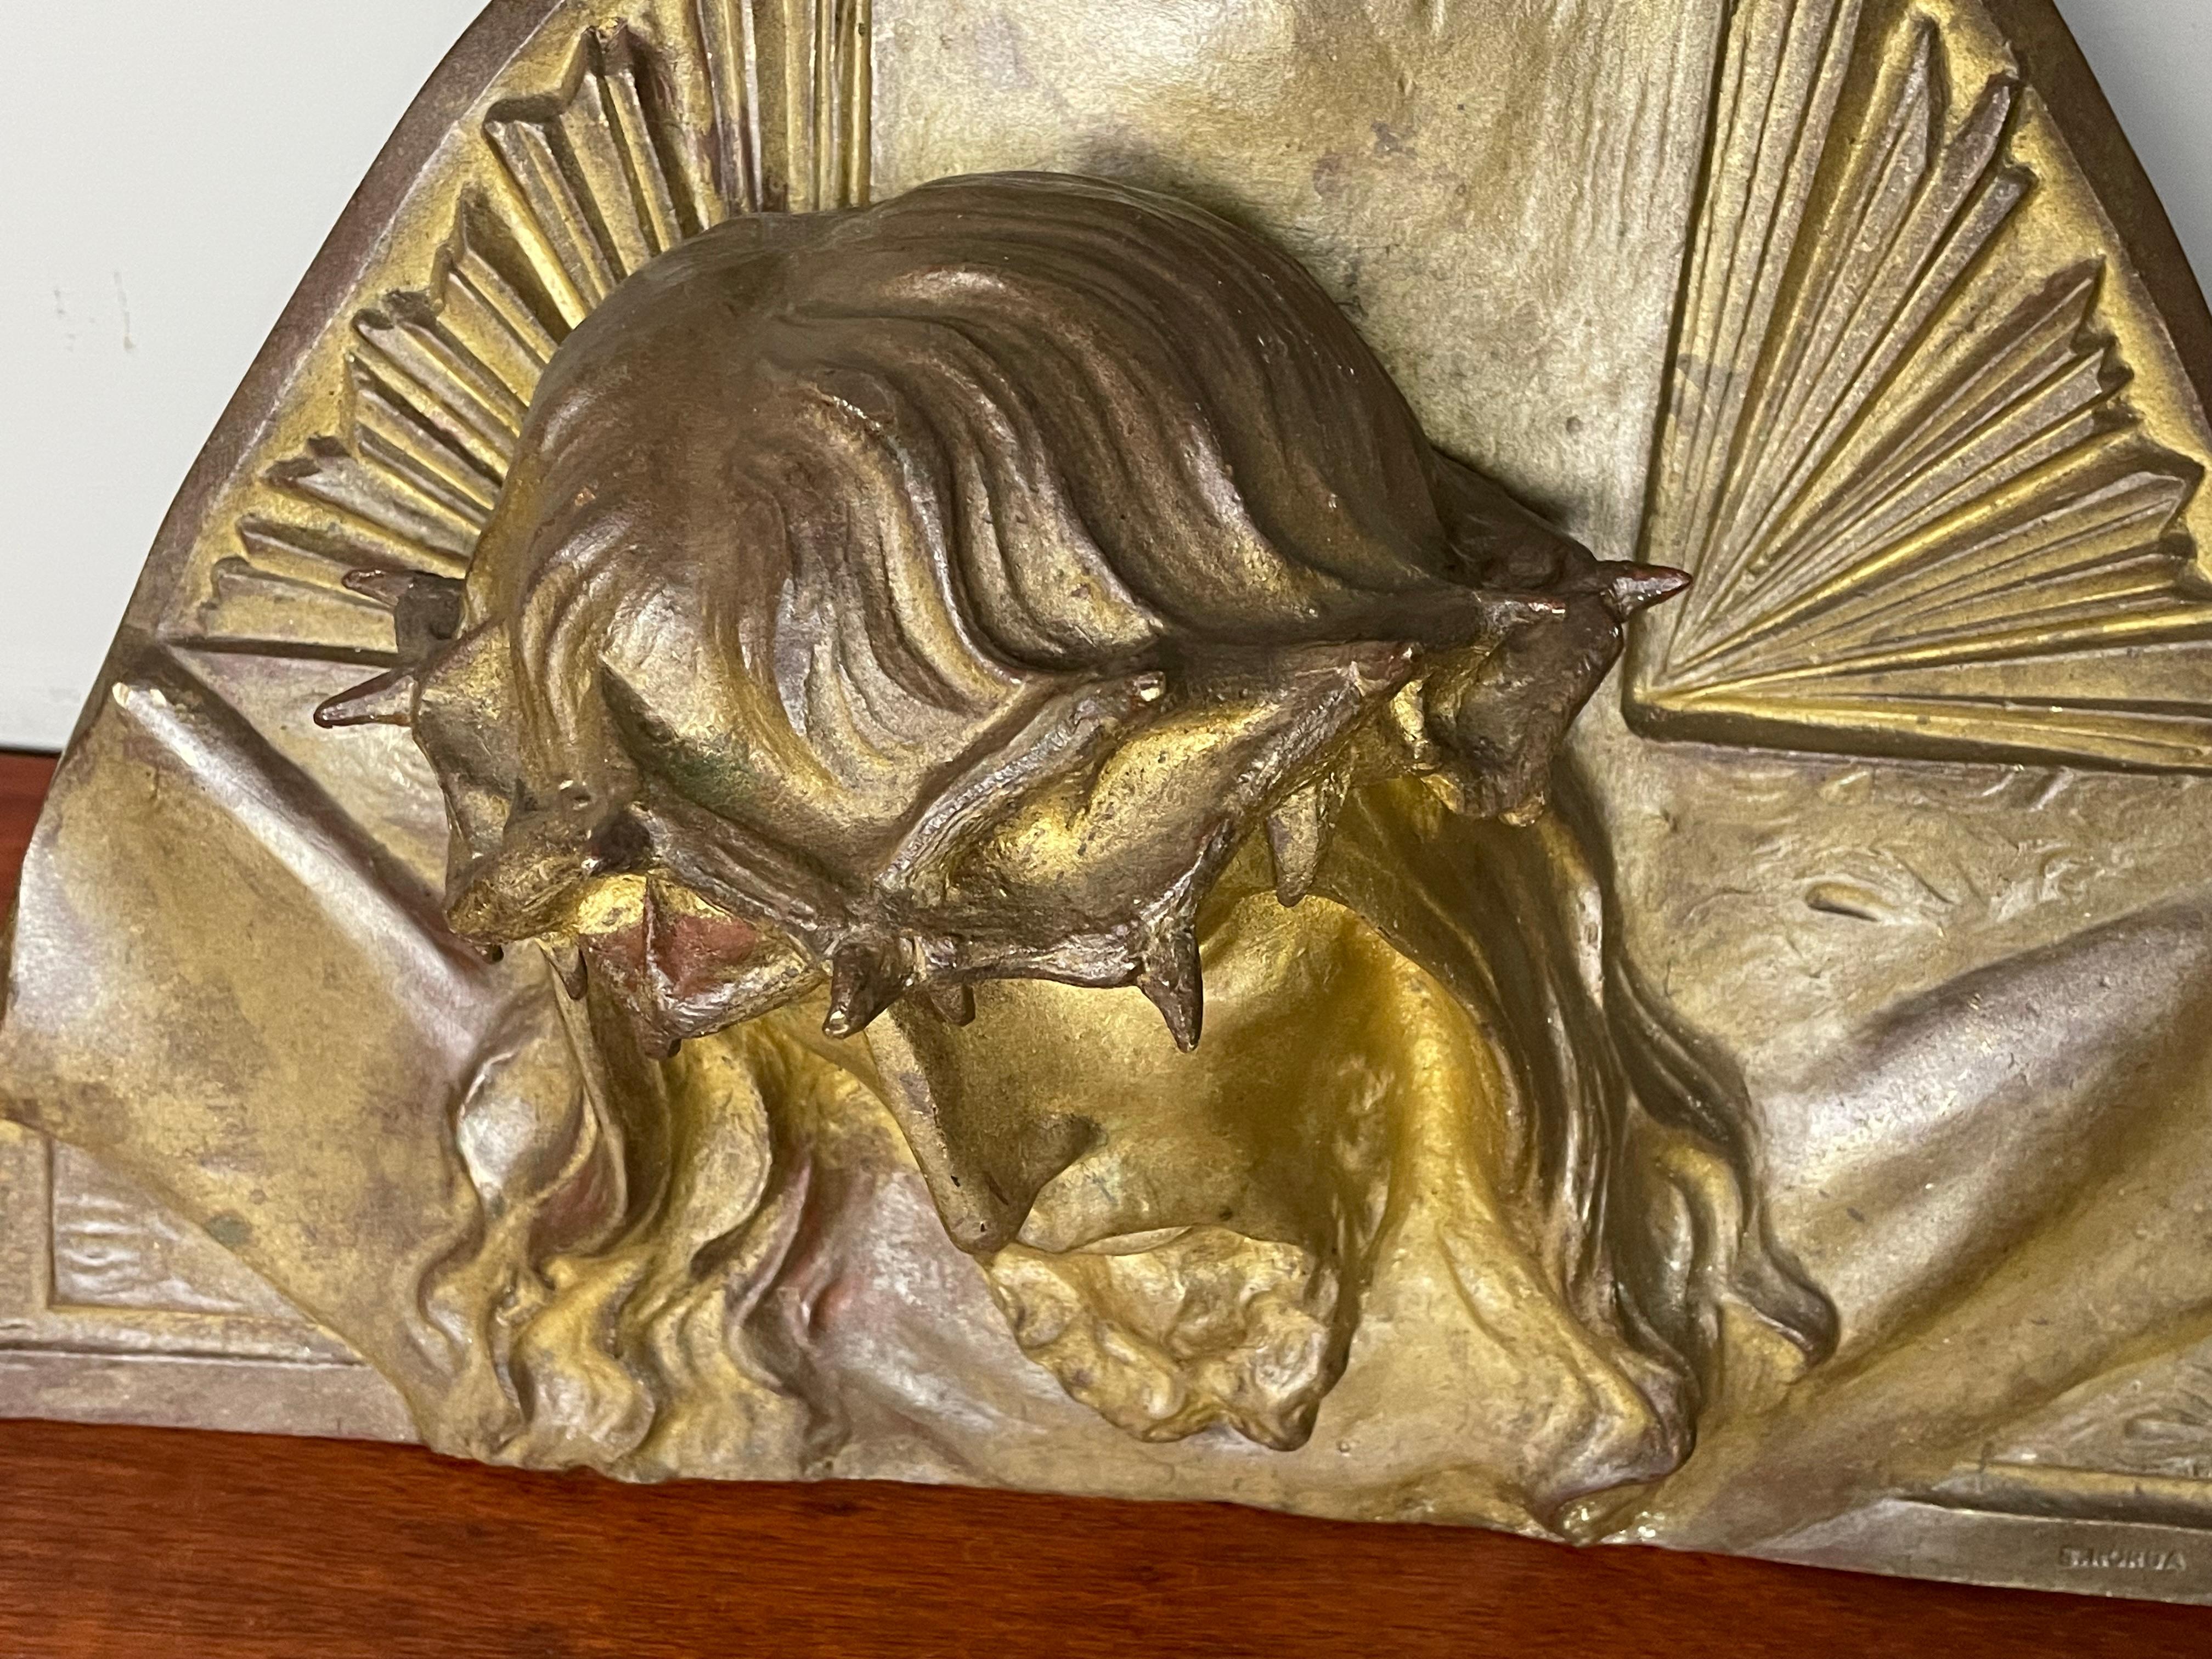 20th Century Gilt Bronze Art Deco Wall Sculpture of Christ with Crown of Thorns by S. Norga